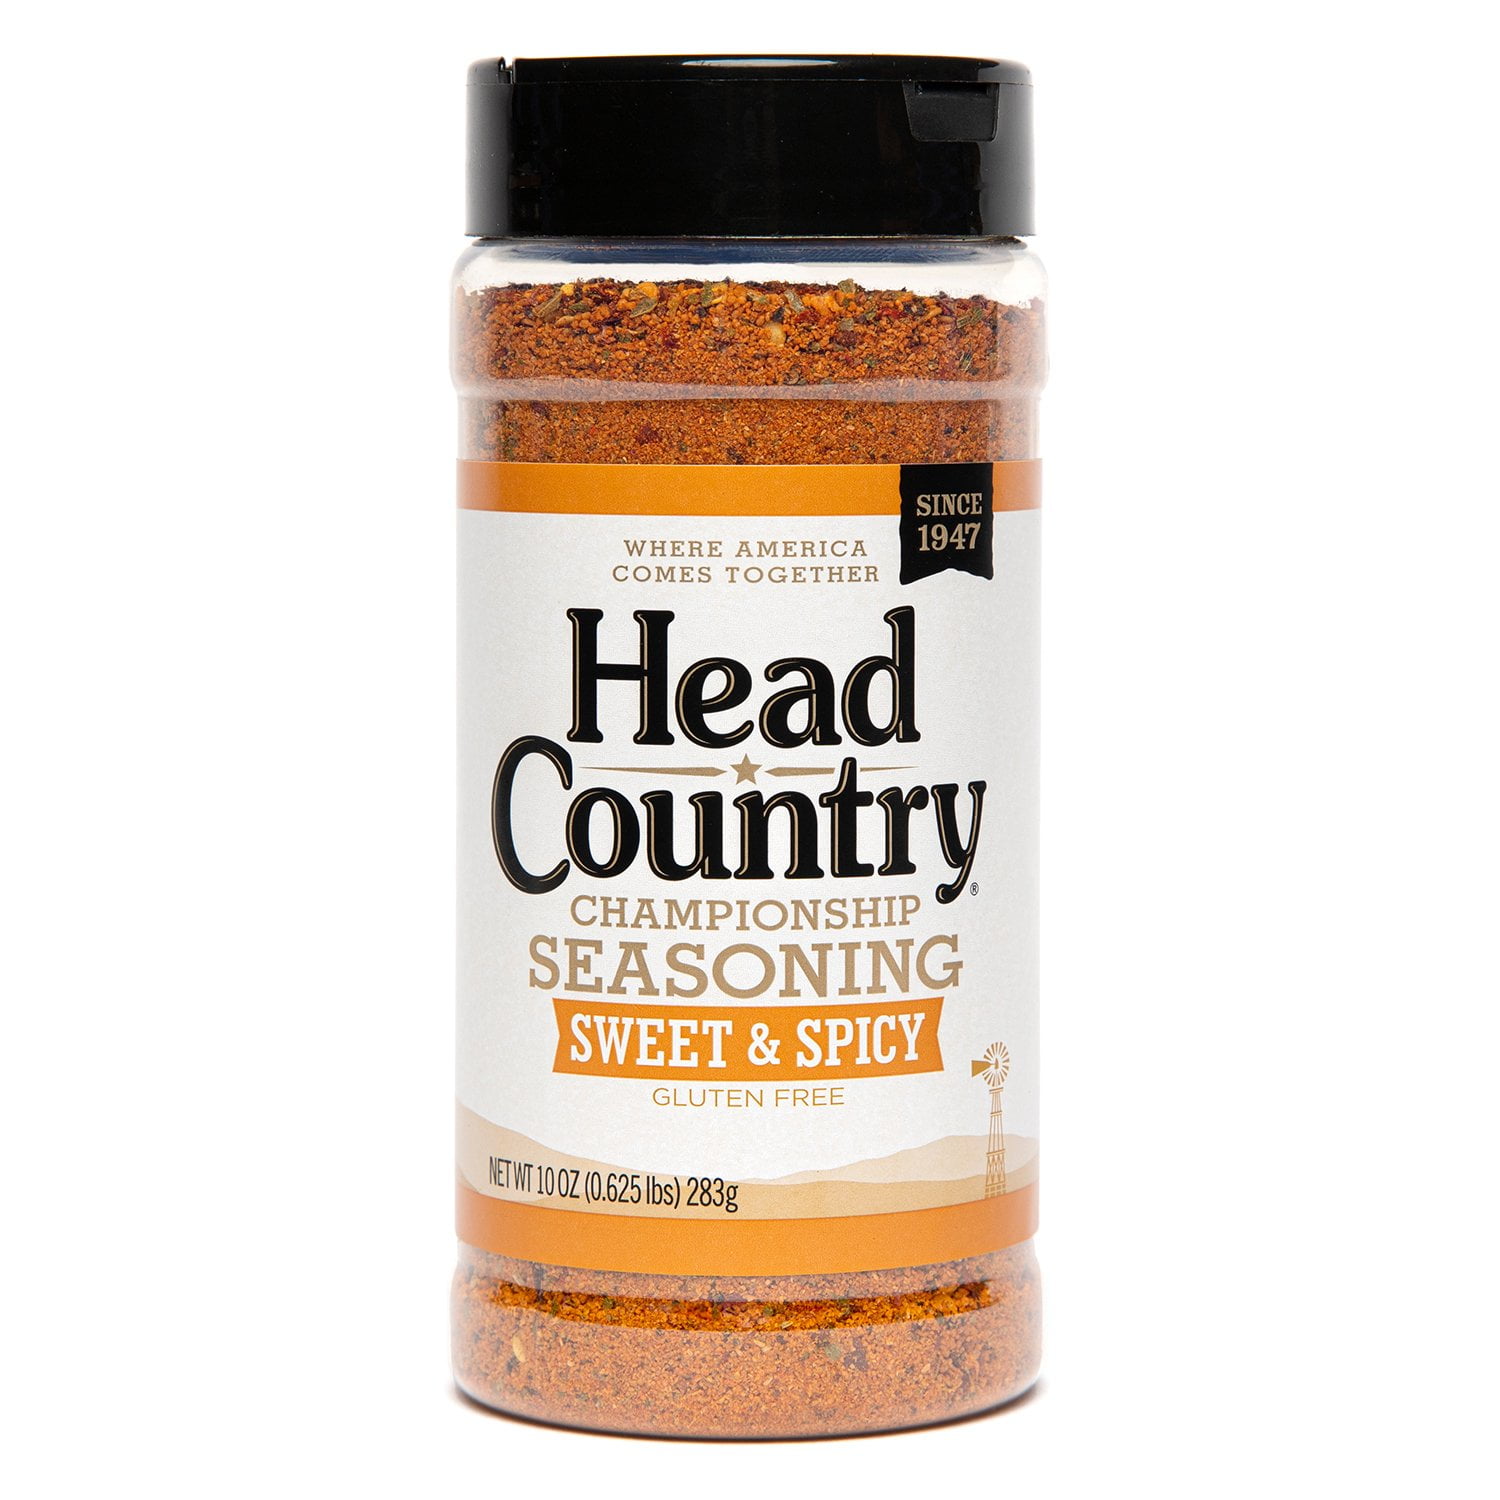 Head Country Bar-B-Q Sweet and Spicy Championship Seasoning, 10 oz, 1 Pack